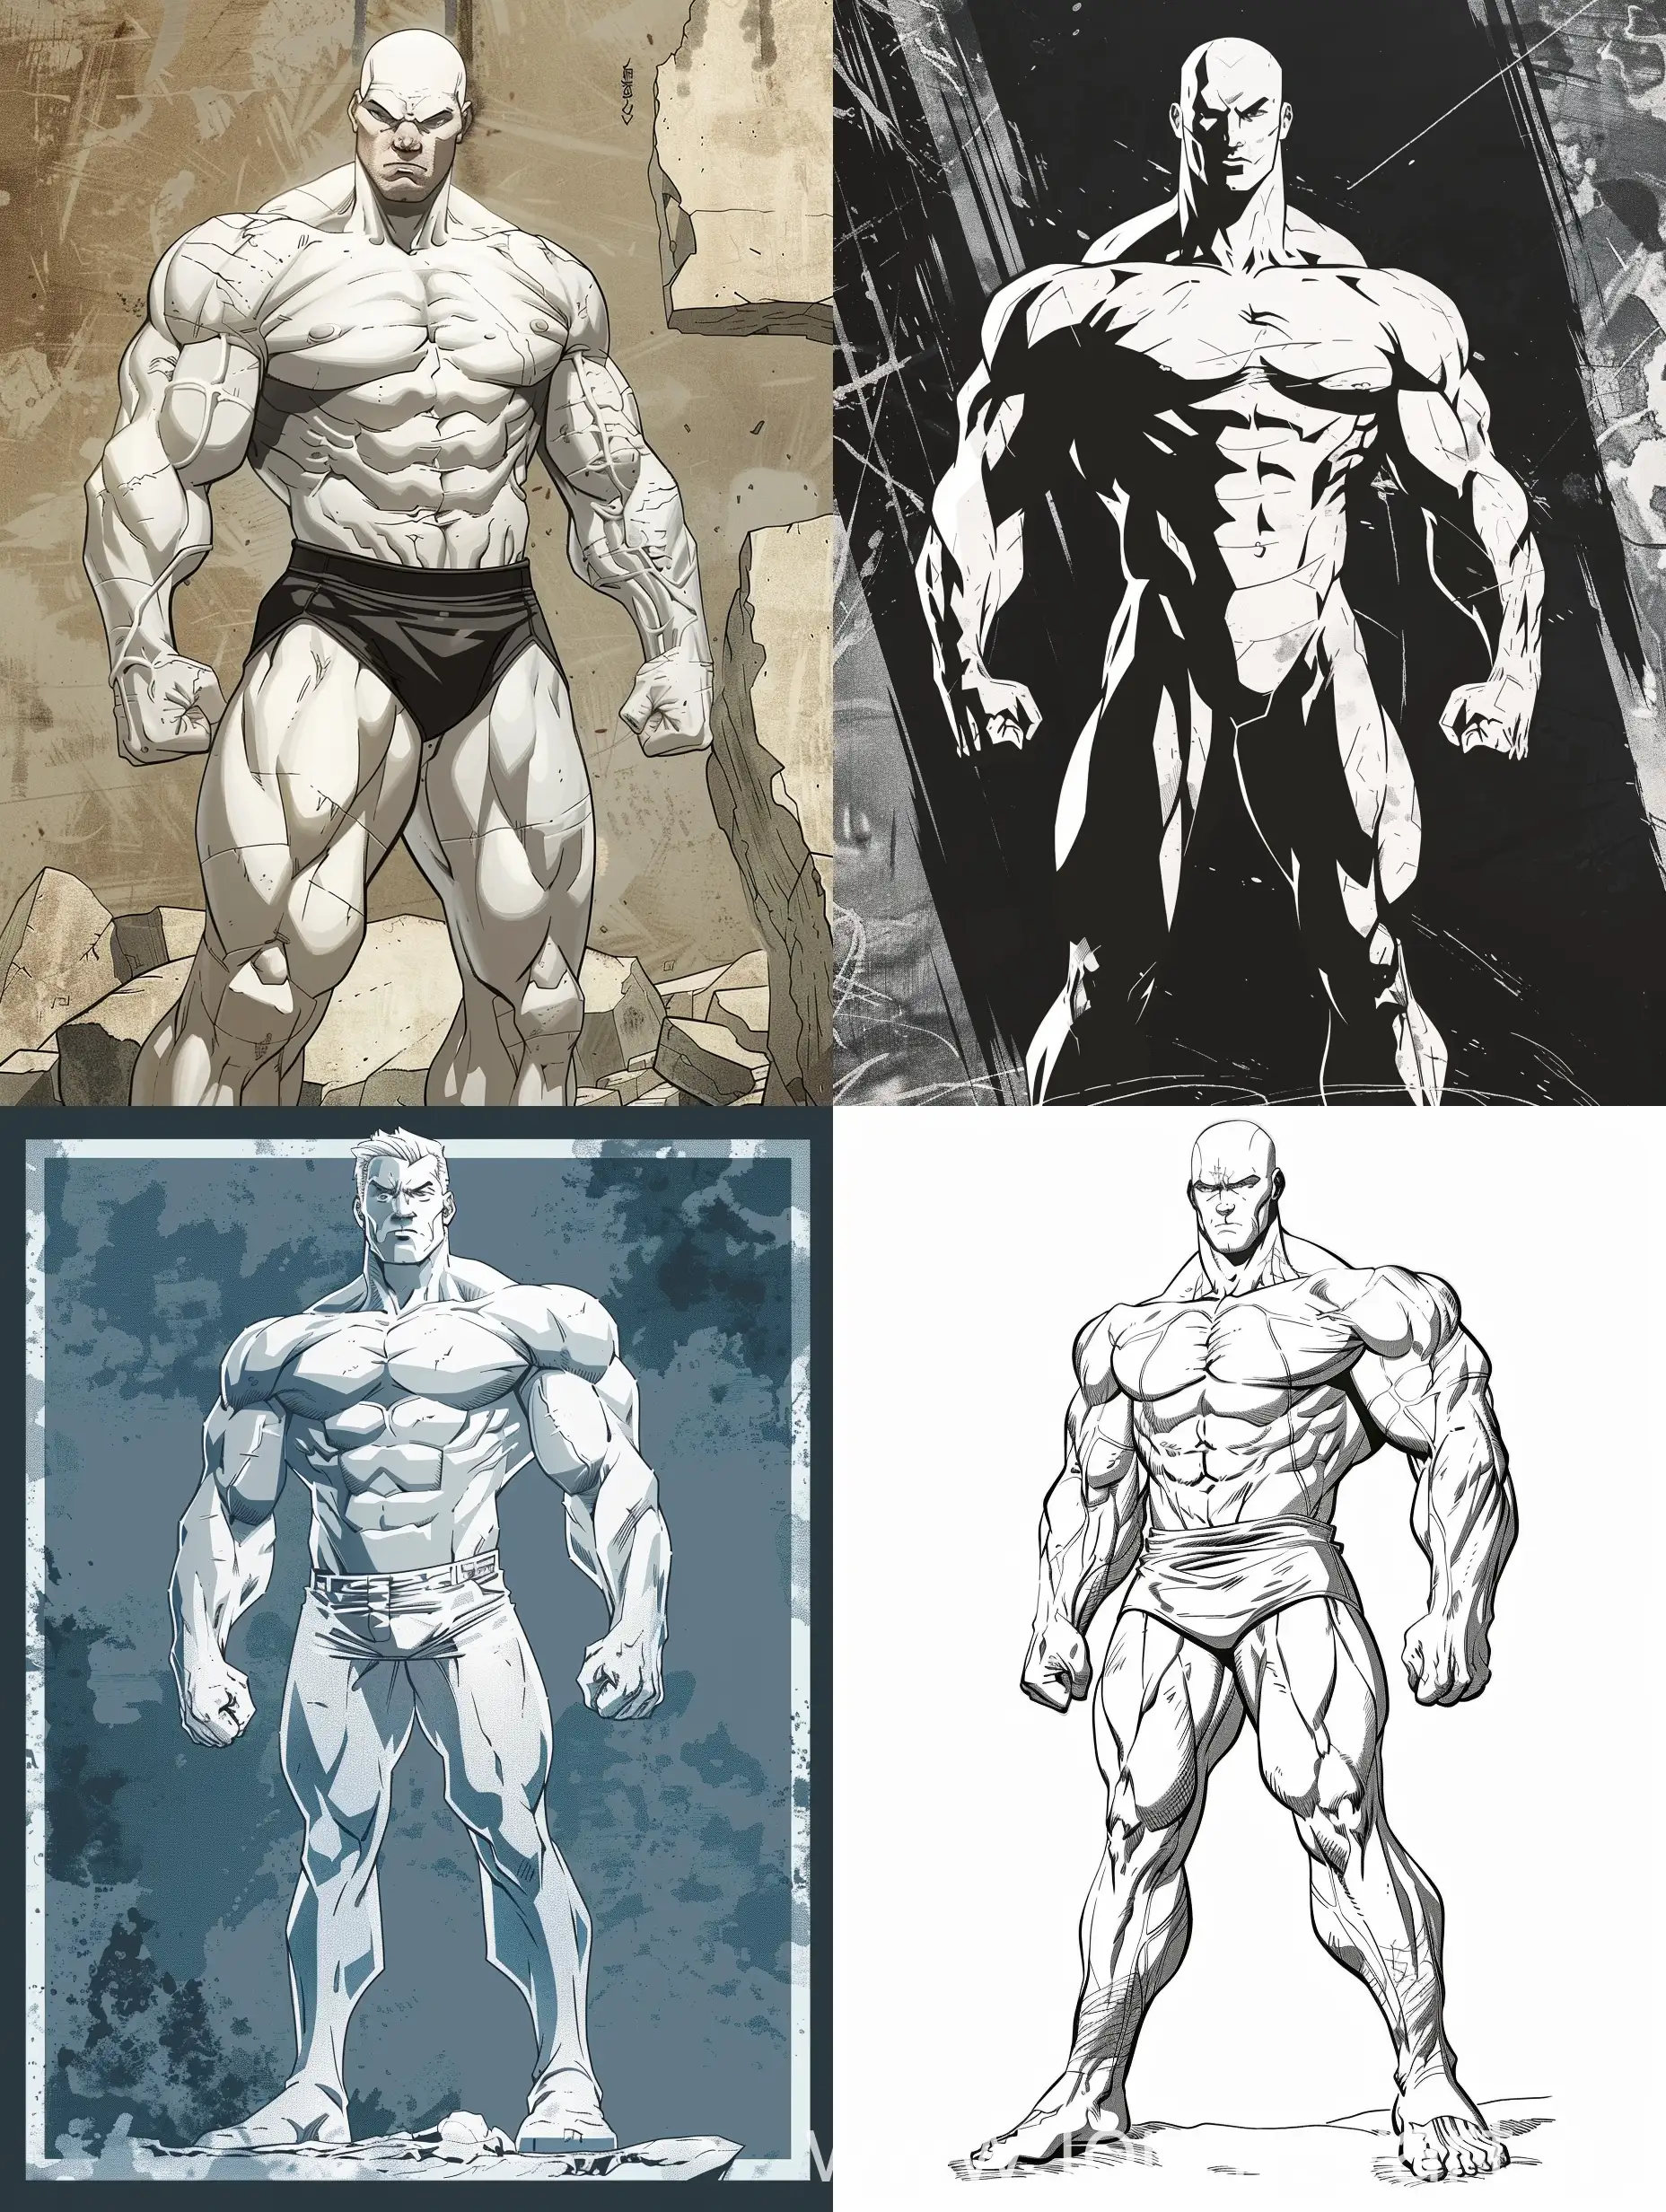 Muscular-Short-Man-in-Comic-Style-with-Very-White-Skin-Full-Body-Pose